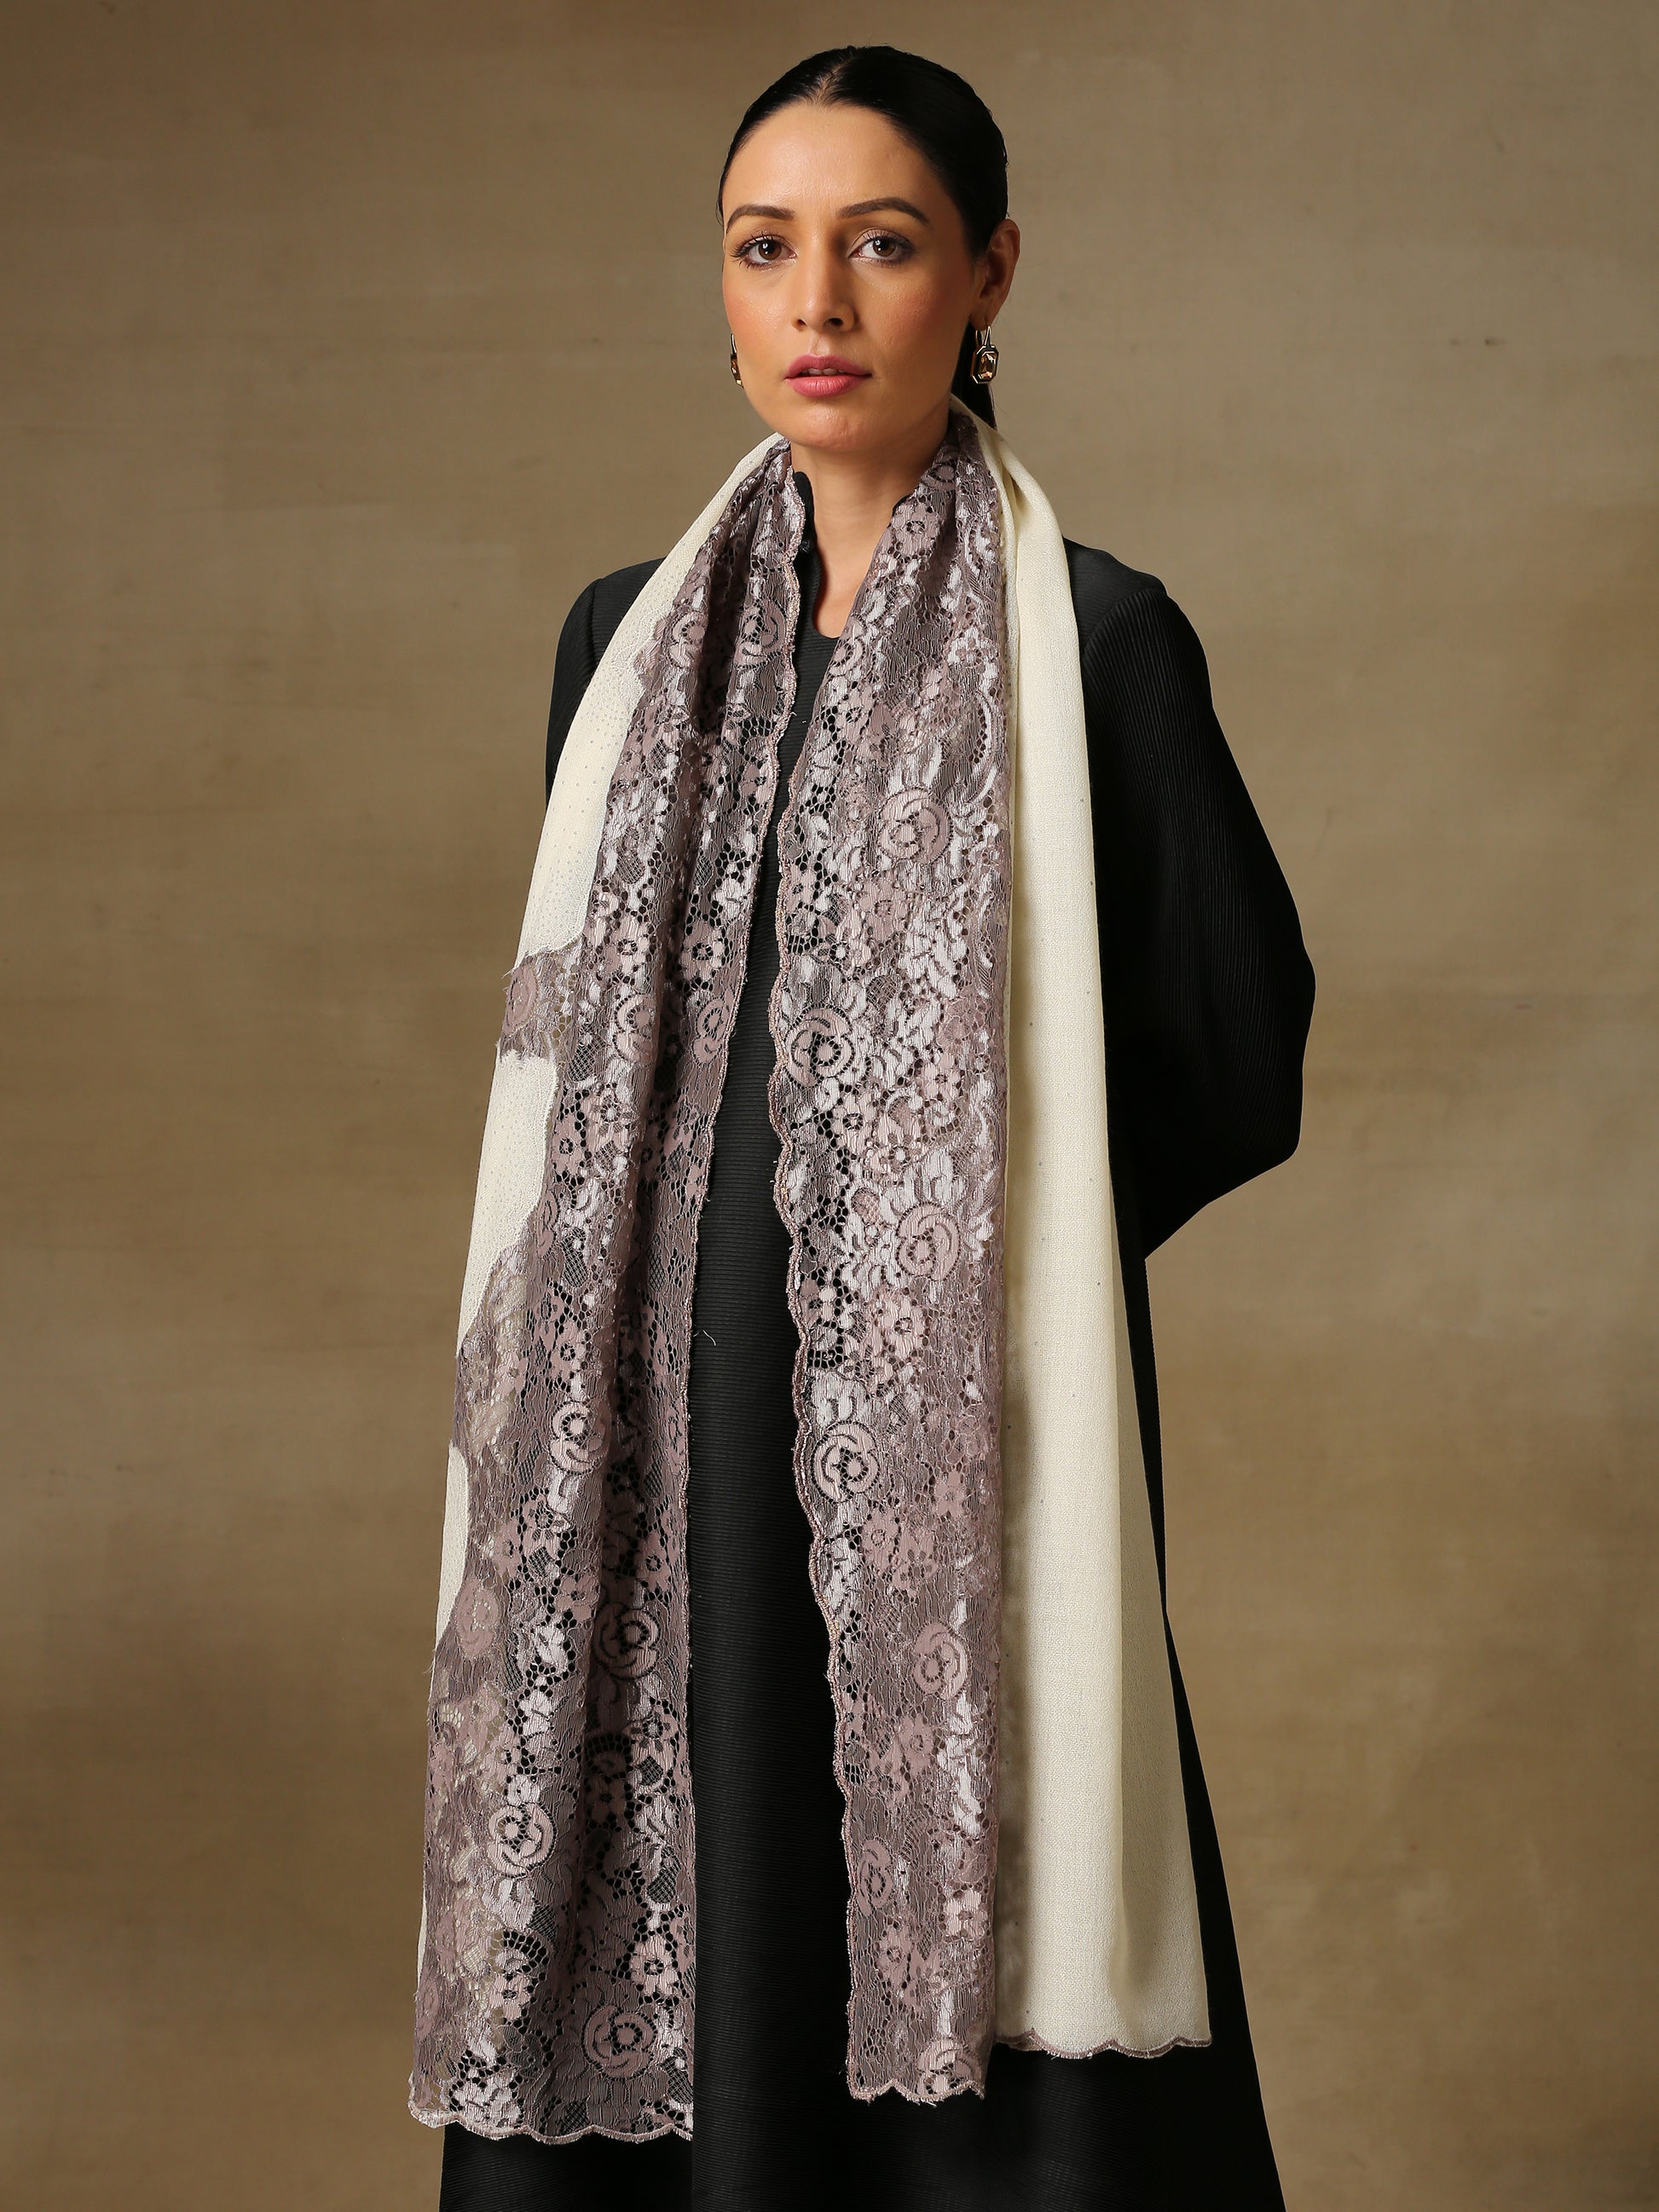 Model is wearing a Celestial Chantilly Zaywar stole from Shaza in White.